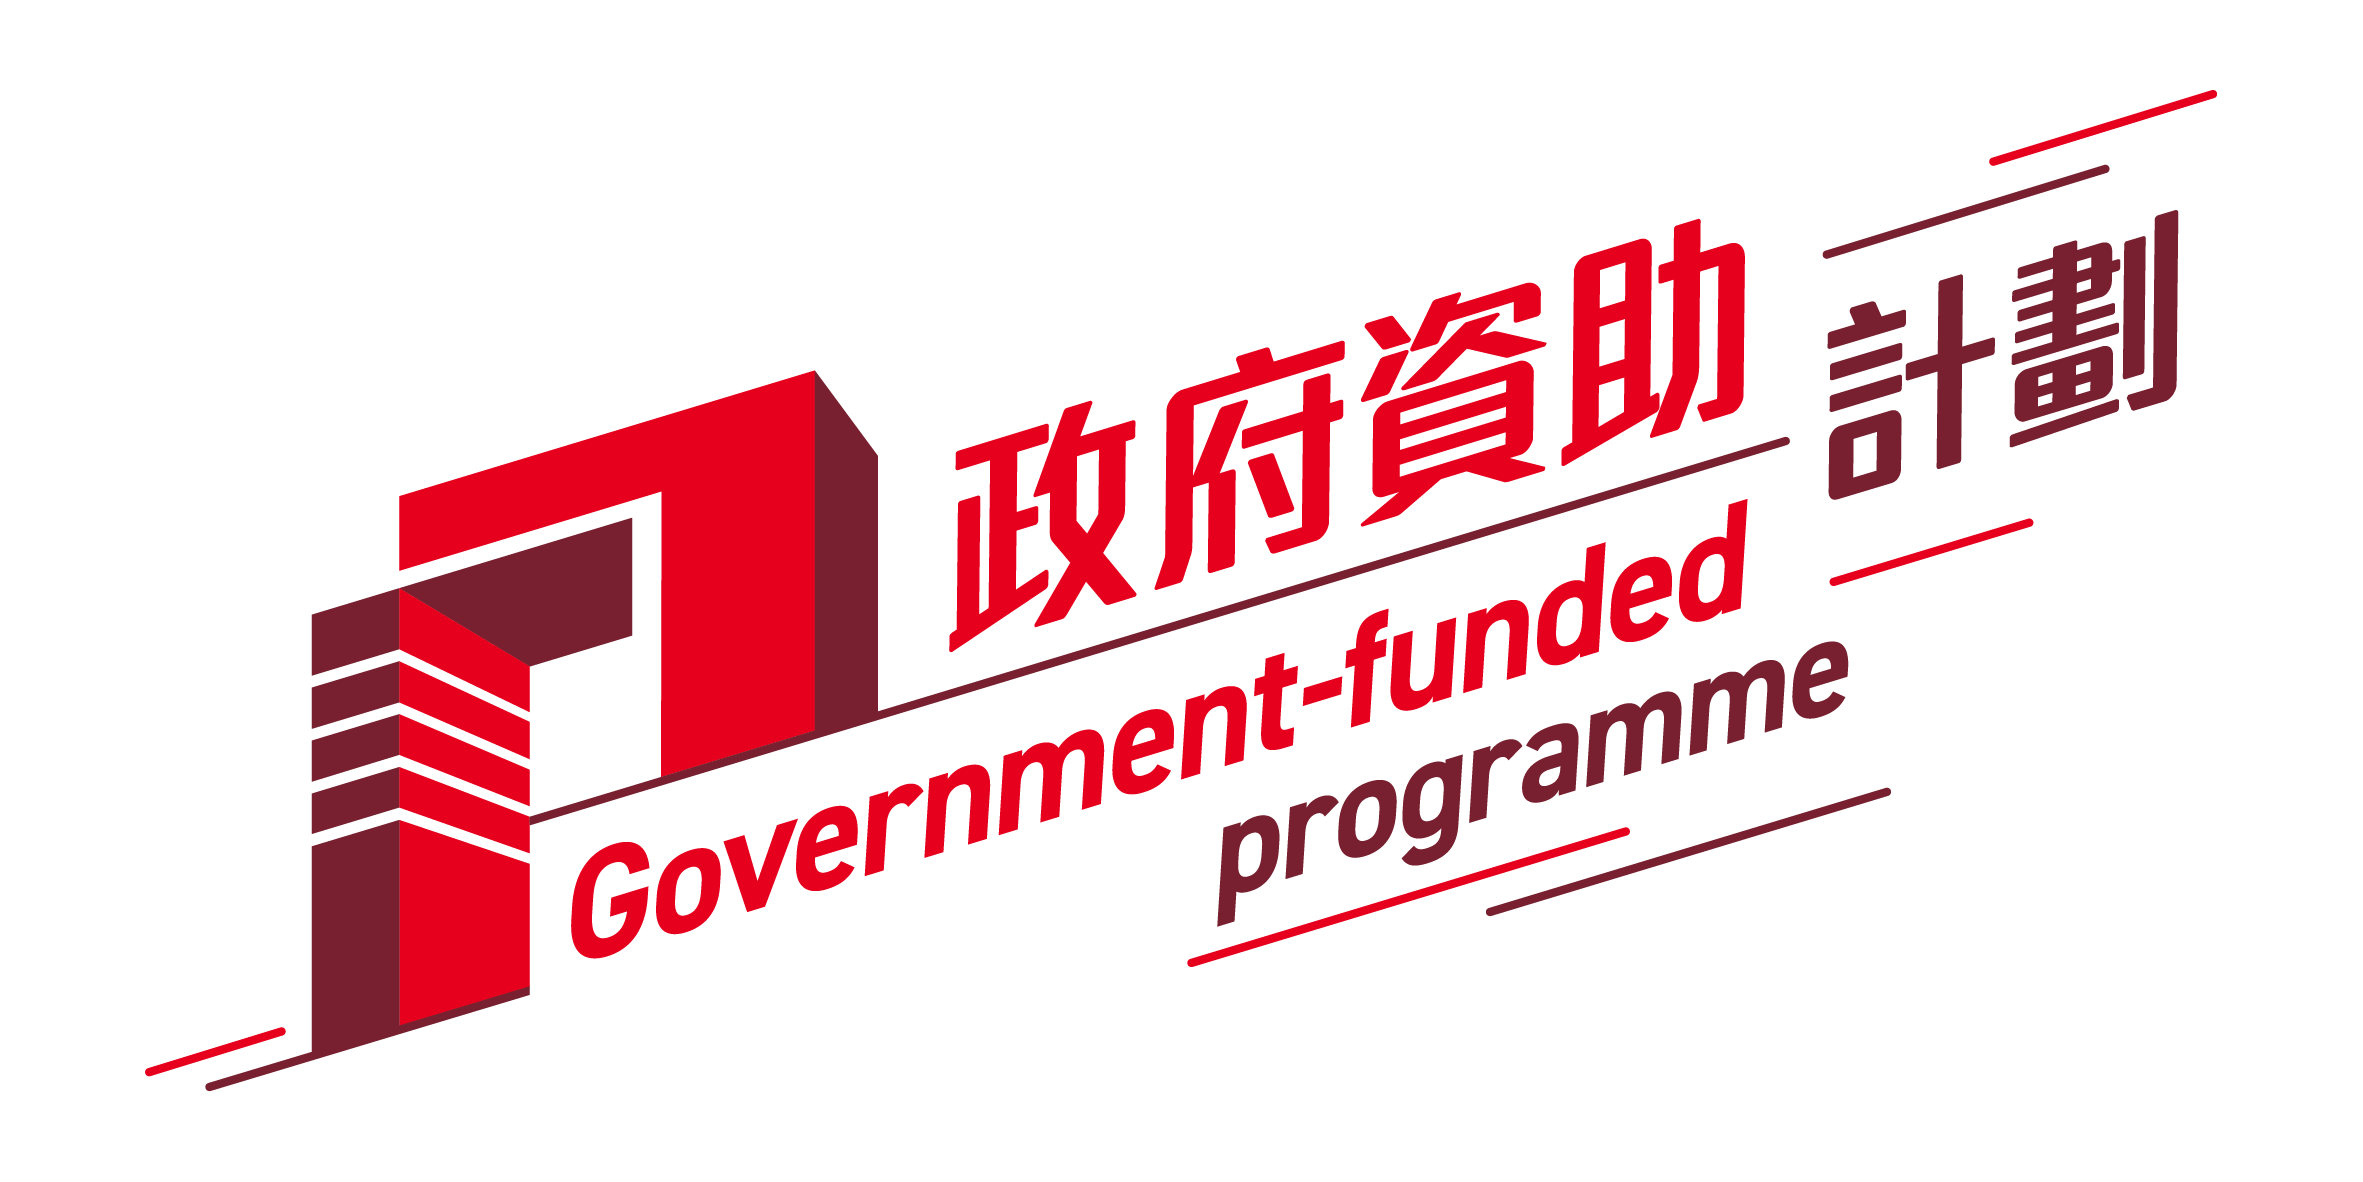 Government-funded programme logo